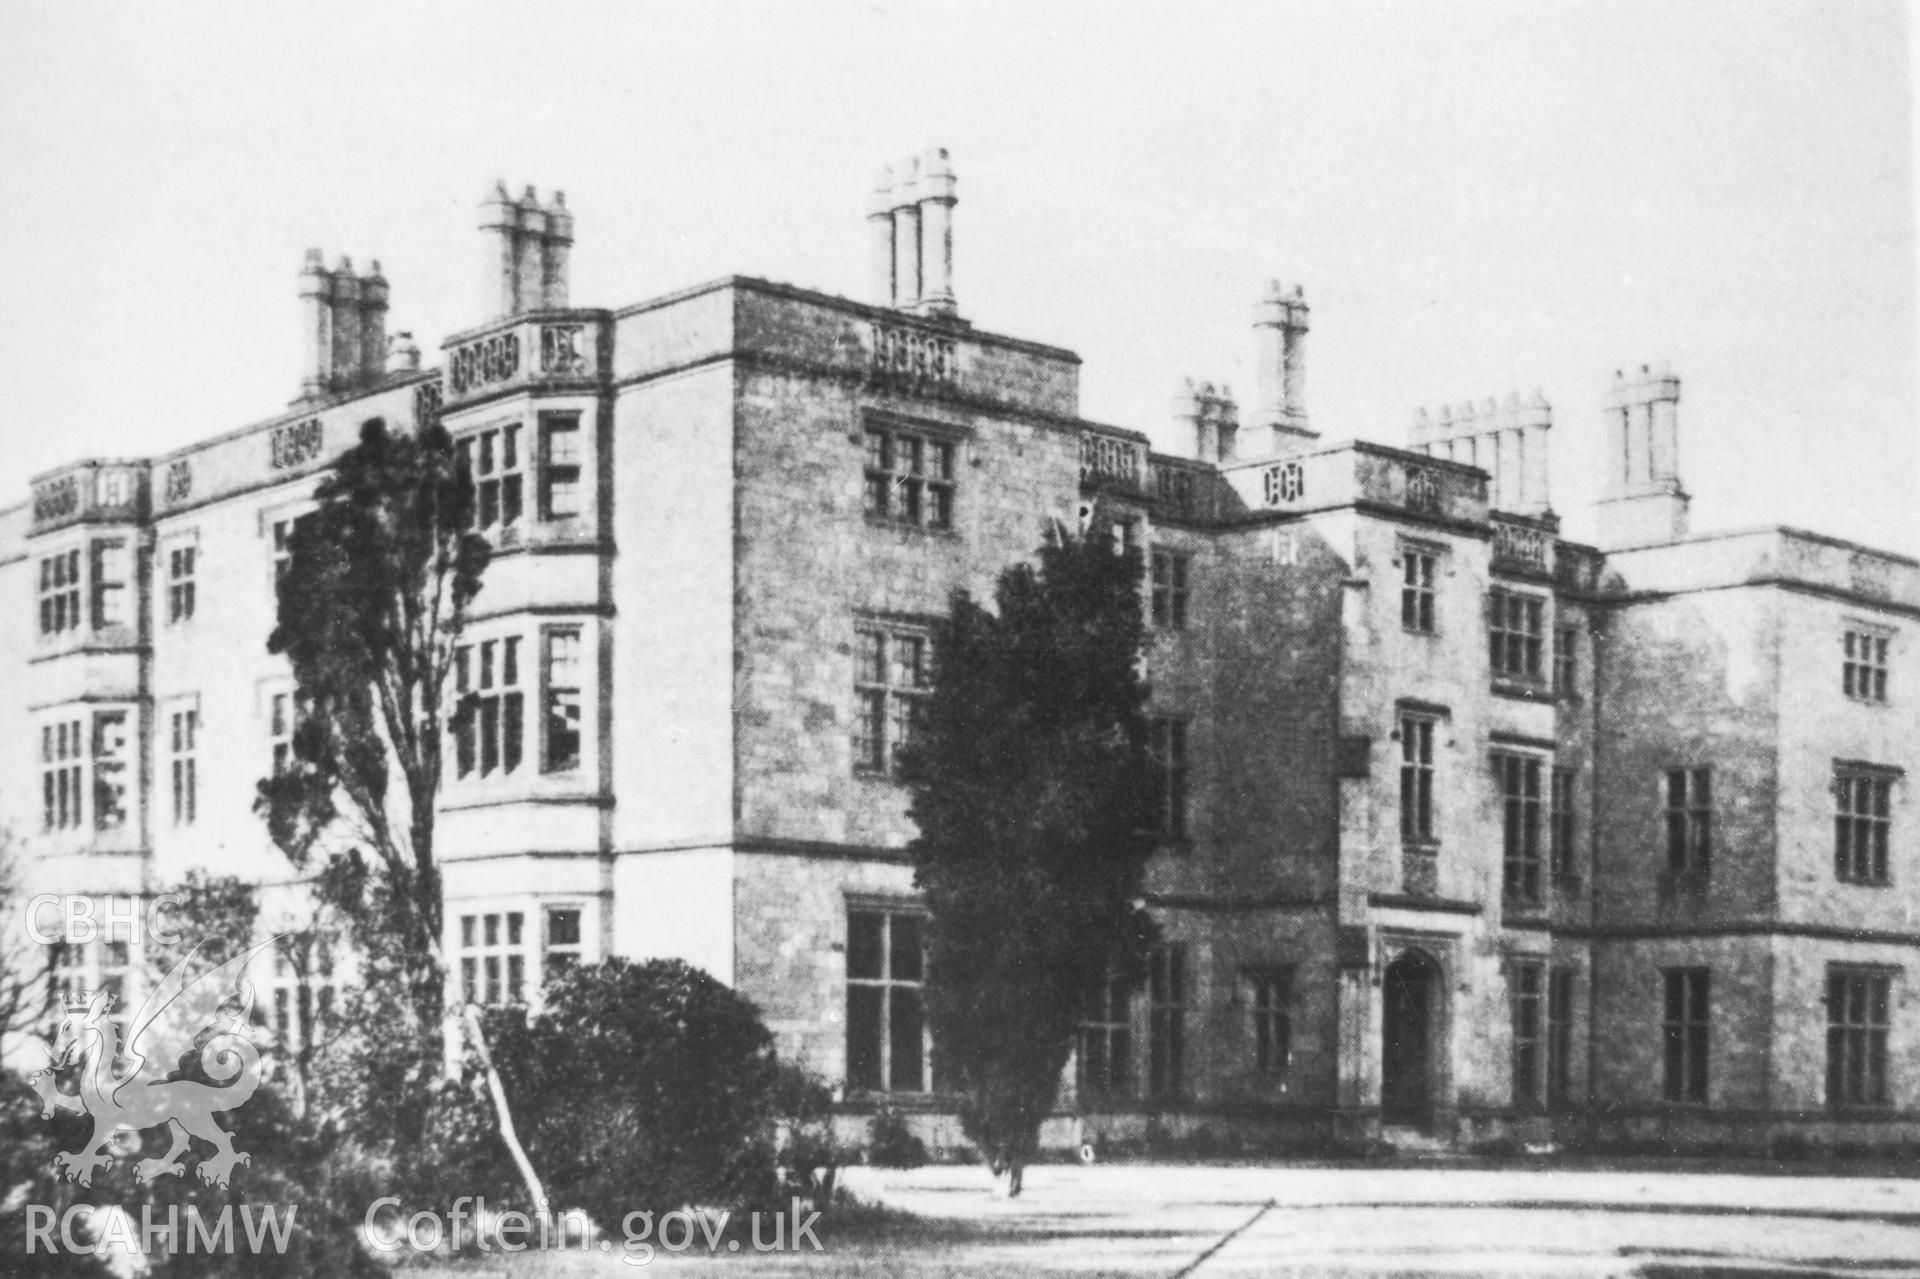 Copy of black and white image of Llanover House, Llanover, Monmouthshire, copied from early undated postcard showing exterior, loaned by Thomas Lloyd.